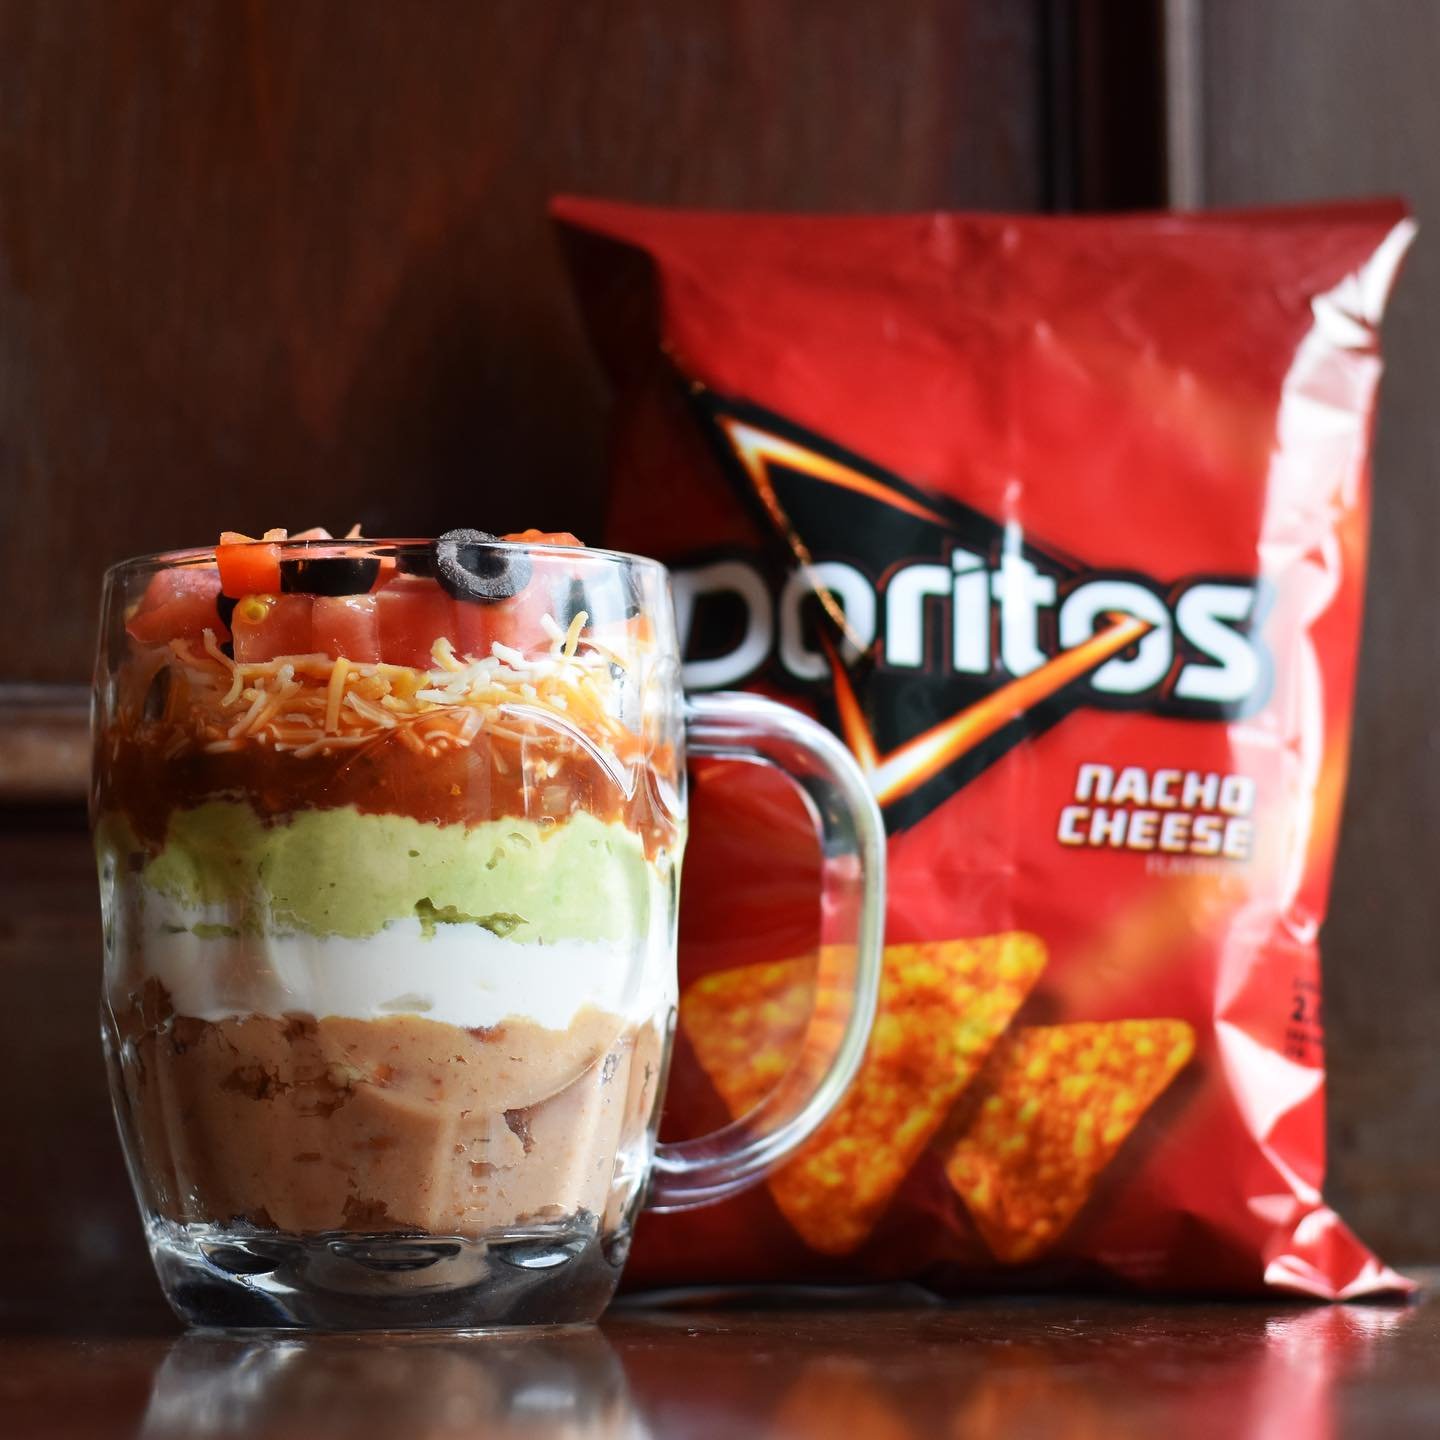 The Munchies: 4/20 Inspired Food and Drinks
April 15th - April 20th

7 Layer &ldquo;Rips&rdquo; - Classic 7 Layer Dip served with a bag of Nacho Doritos

BLunT Sandwich - Heirloom Tomato, Pimento Cheese, Bacon Jam, Bibb Lettuce on Toasted Sourdough

